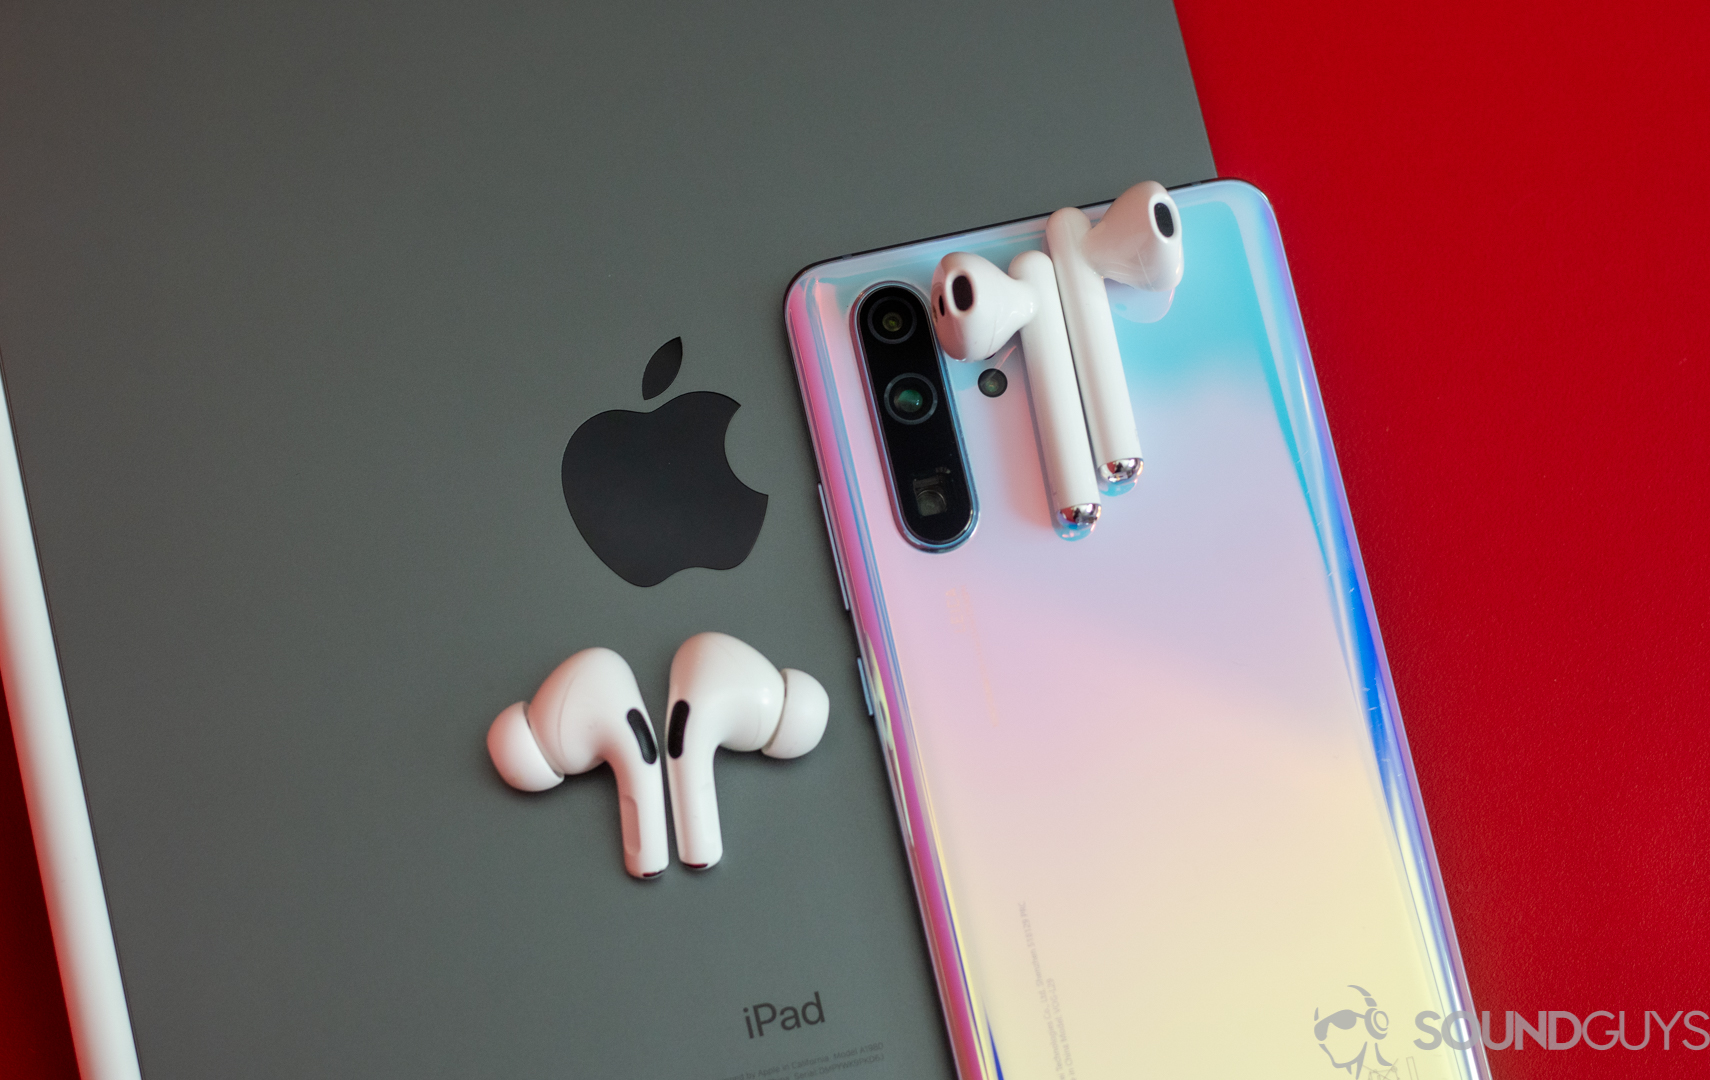 mudder Engel Credential Apple AirPods Pro vs HUAWEI Freebuds 3: The pro or the clone?